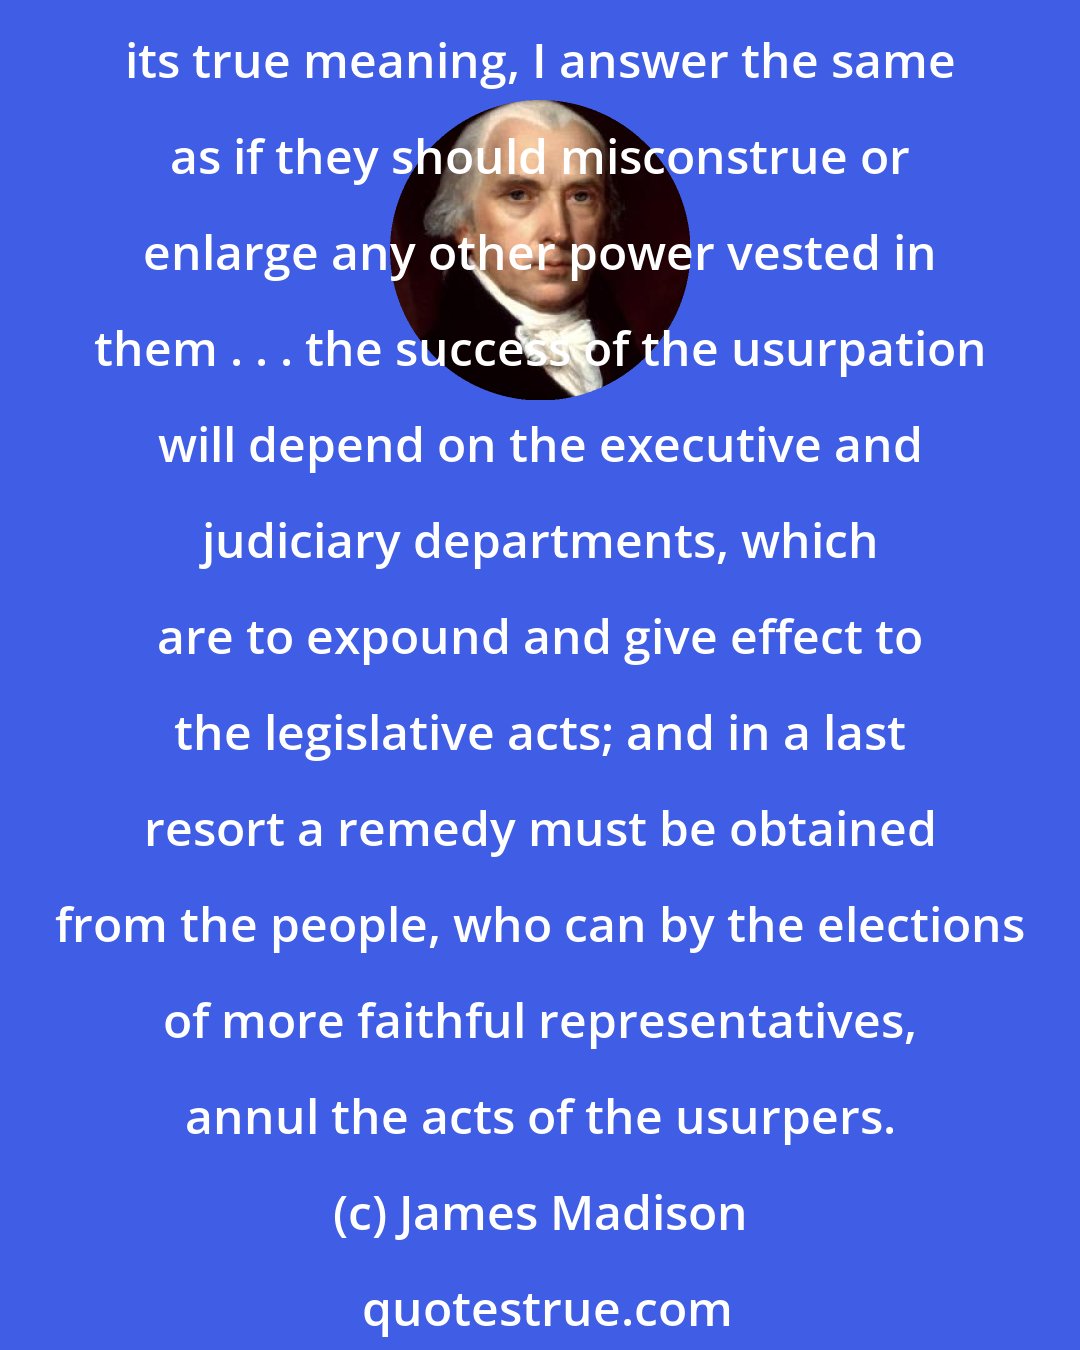 James Madison: What is to be the consequence, in case the Congress shall misconstrue this part [the necessary and proper clause] of the Constitution and exercise powers not warranted by its true meaning, I answer the same as if they should misconstrue or enlarge any other power vested in them . . . the success of the usurpation will depend on the executive and judiciary departments, which are to expound and give effect to the legislative acts; and in a last resort a remedy must be obtained from the people, who can by the elections of more faithful representatives, annul the acts of the usurpers.